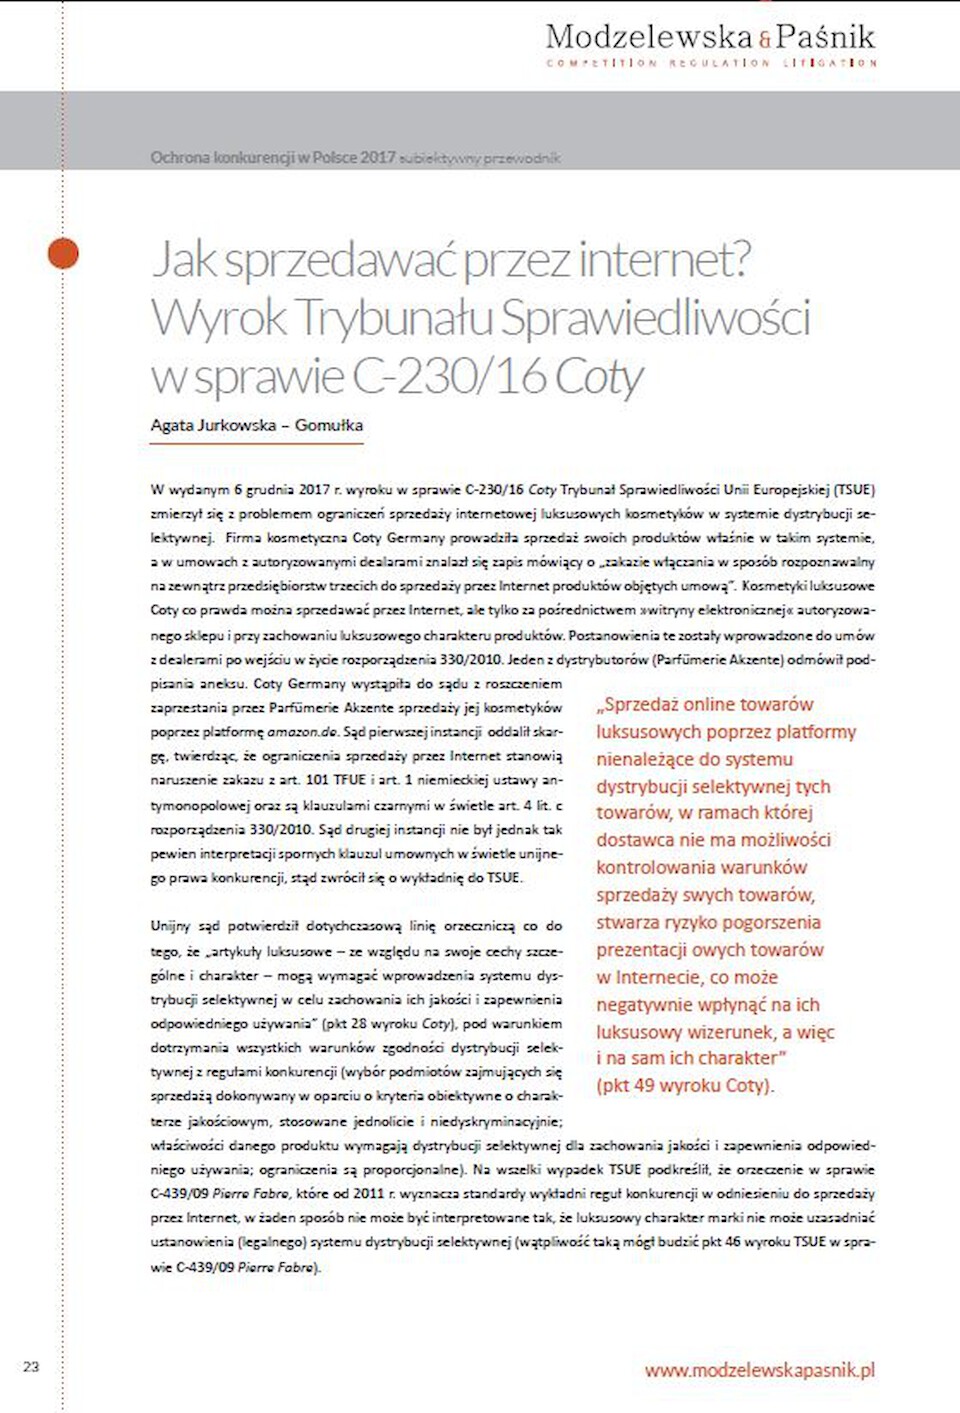 How to sell over the Internet? The judgment of the Court of Justice in case C-230/16 Coty